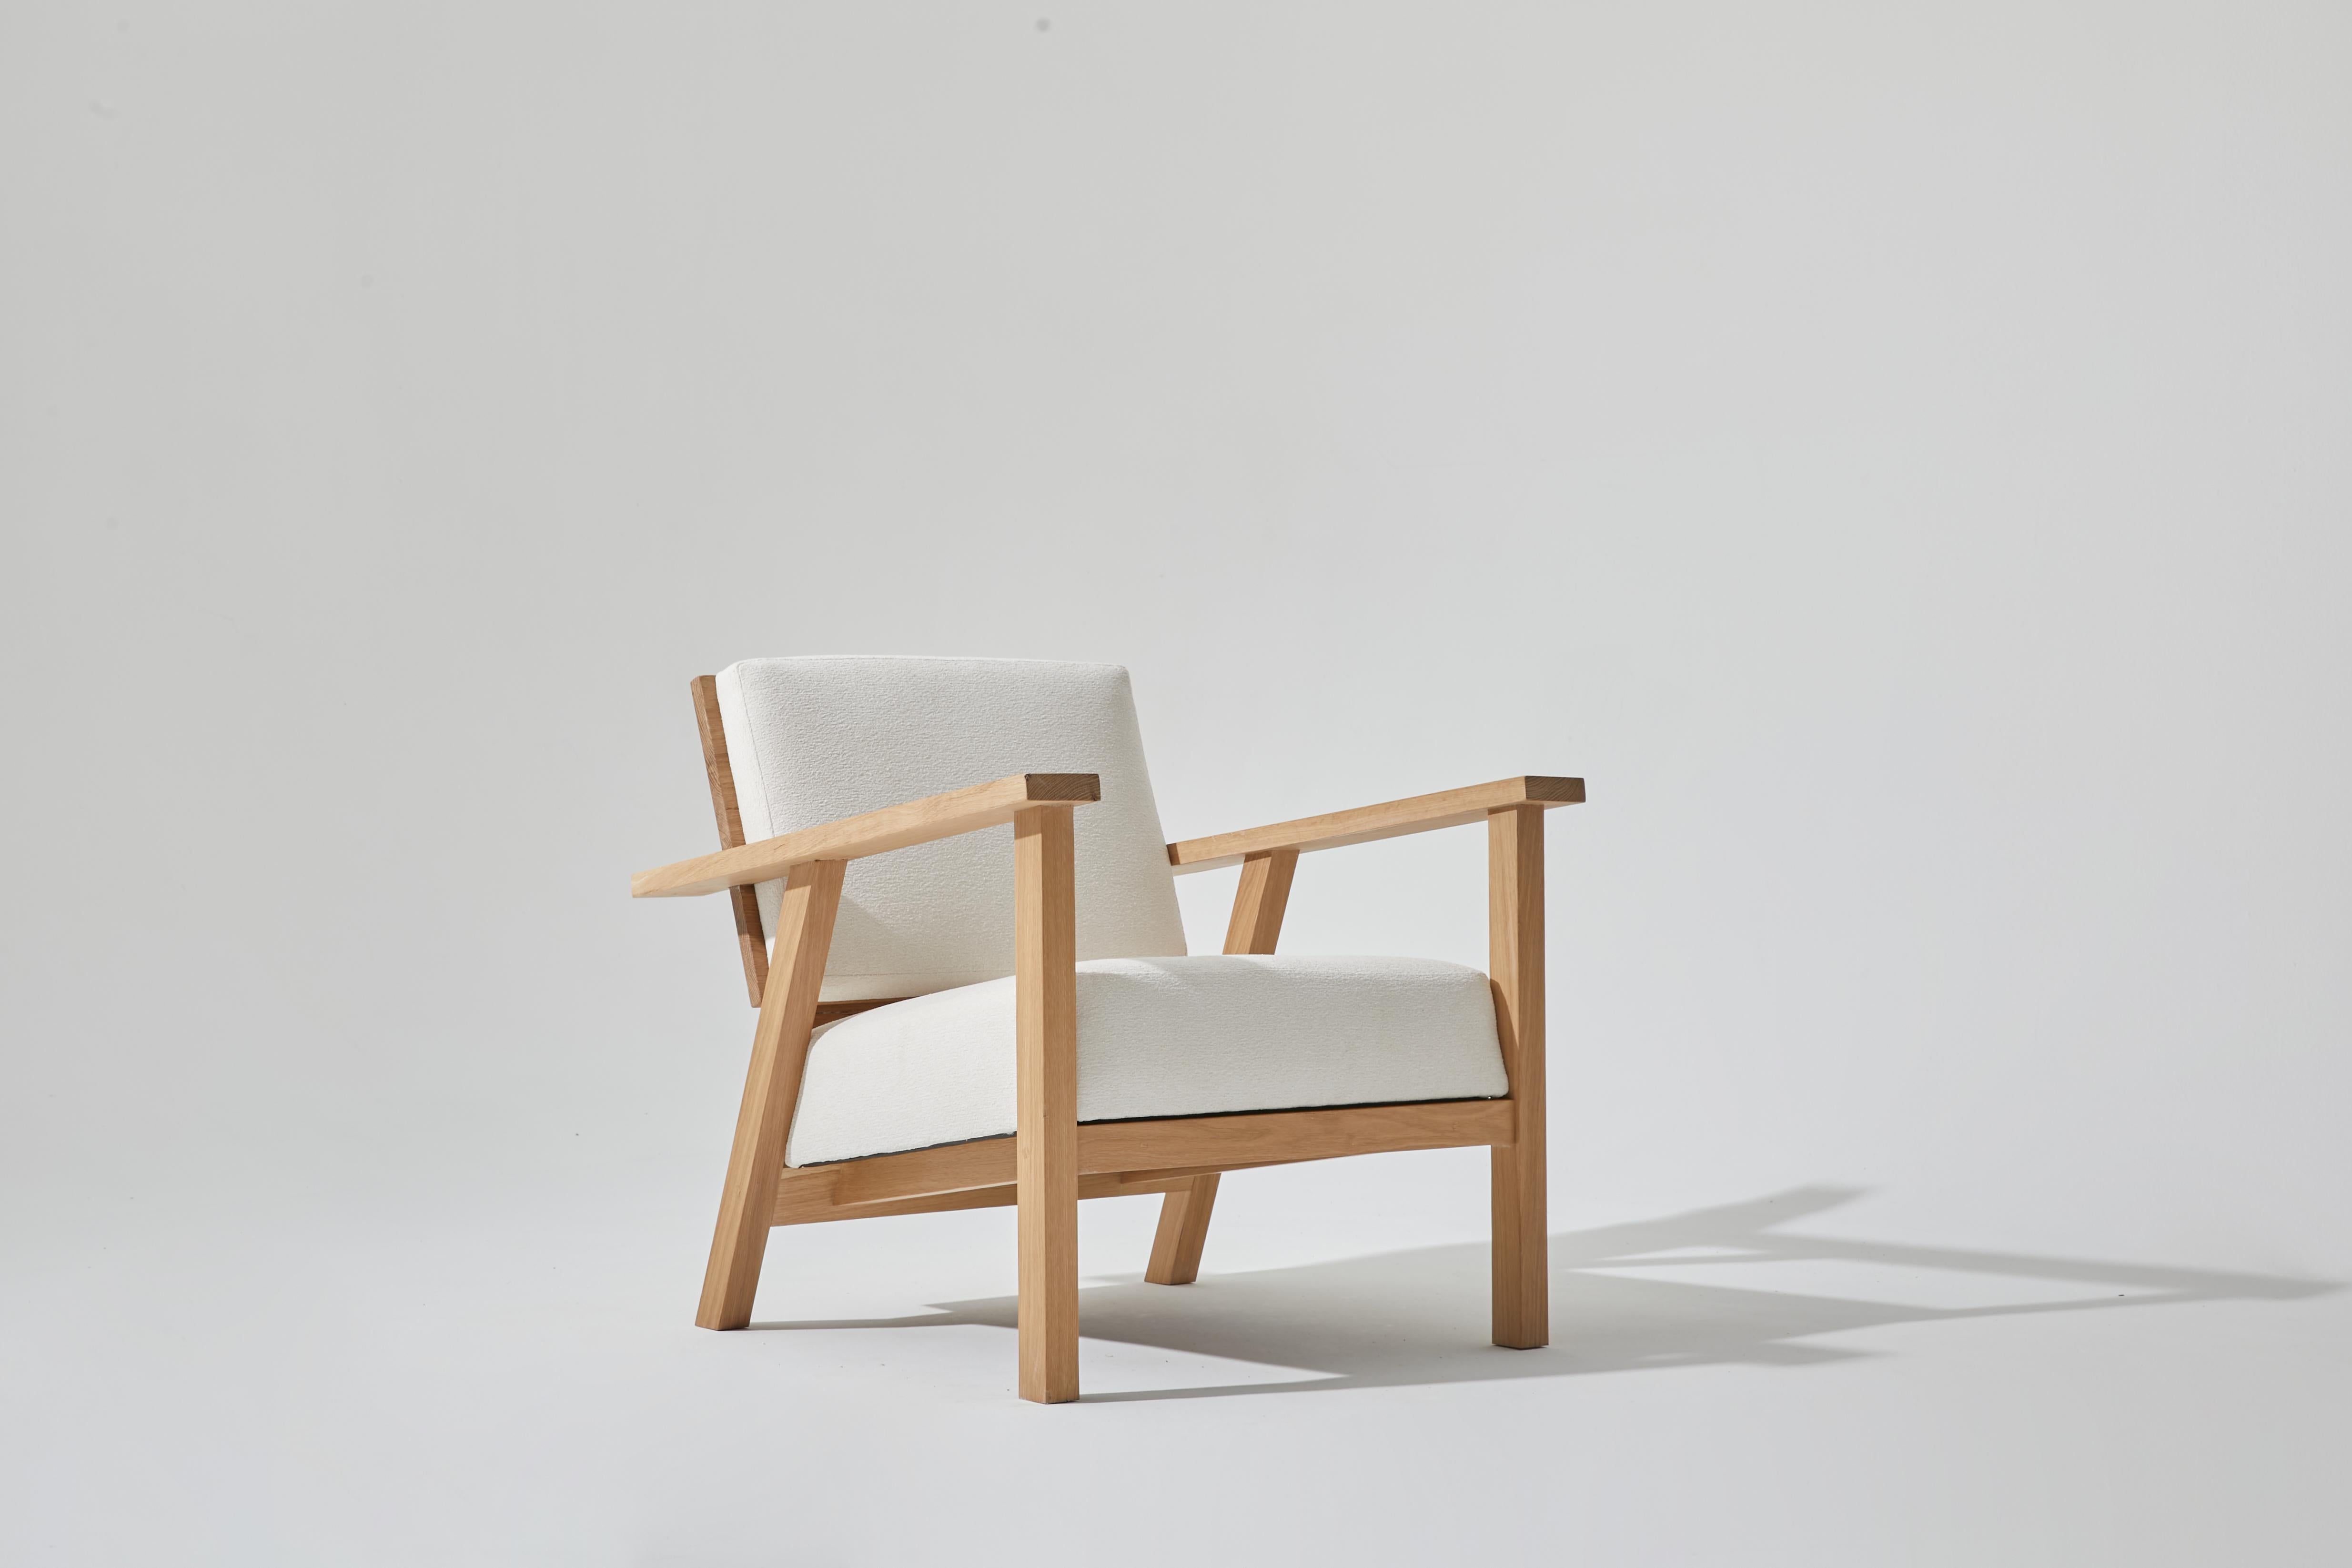 The SH01 chair was designed at just the right angle for lounging or working. I went through many prototypes and styles to find the fit that felt just right with the best support and comfort. It is made using traditional mortise and tenon joinery